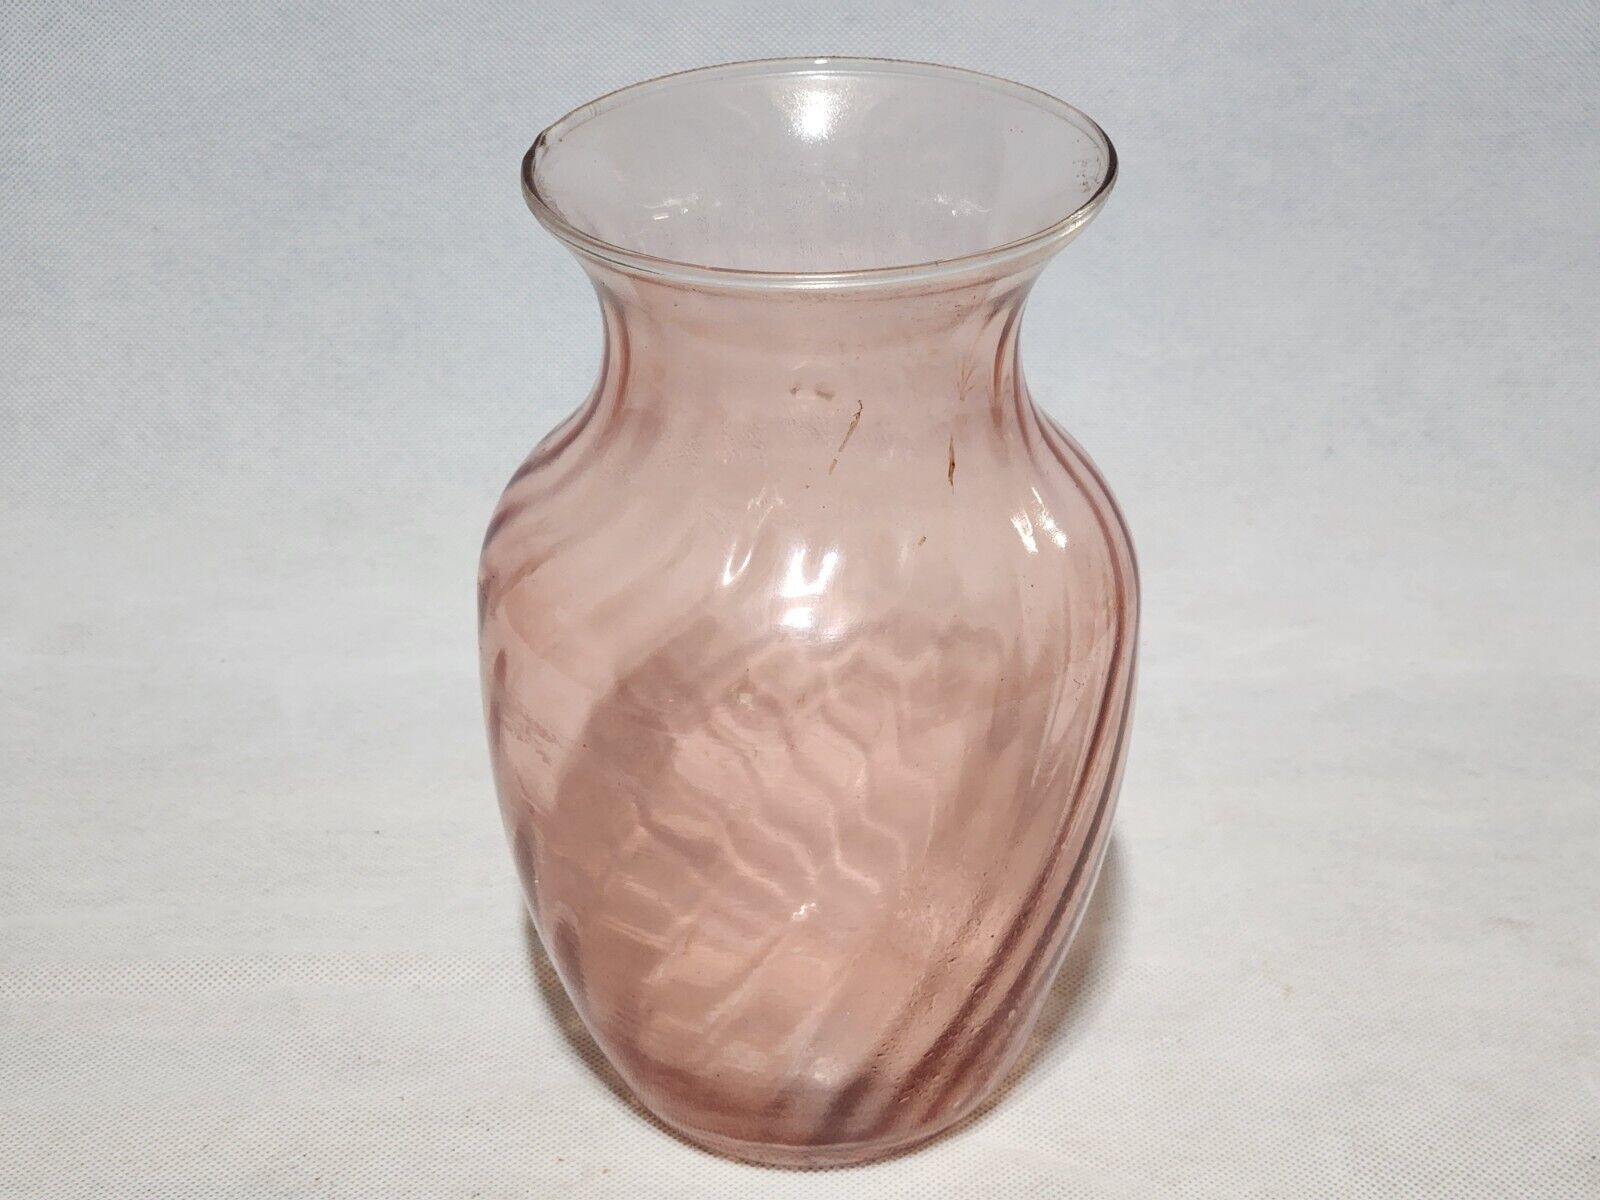 Primary image for ILLUSIONS Pink Swirl 8 Inch Flared Glass Vase Jar Jug Pitcher - FREE SHIPPING